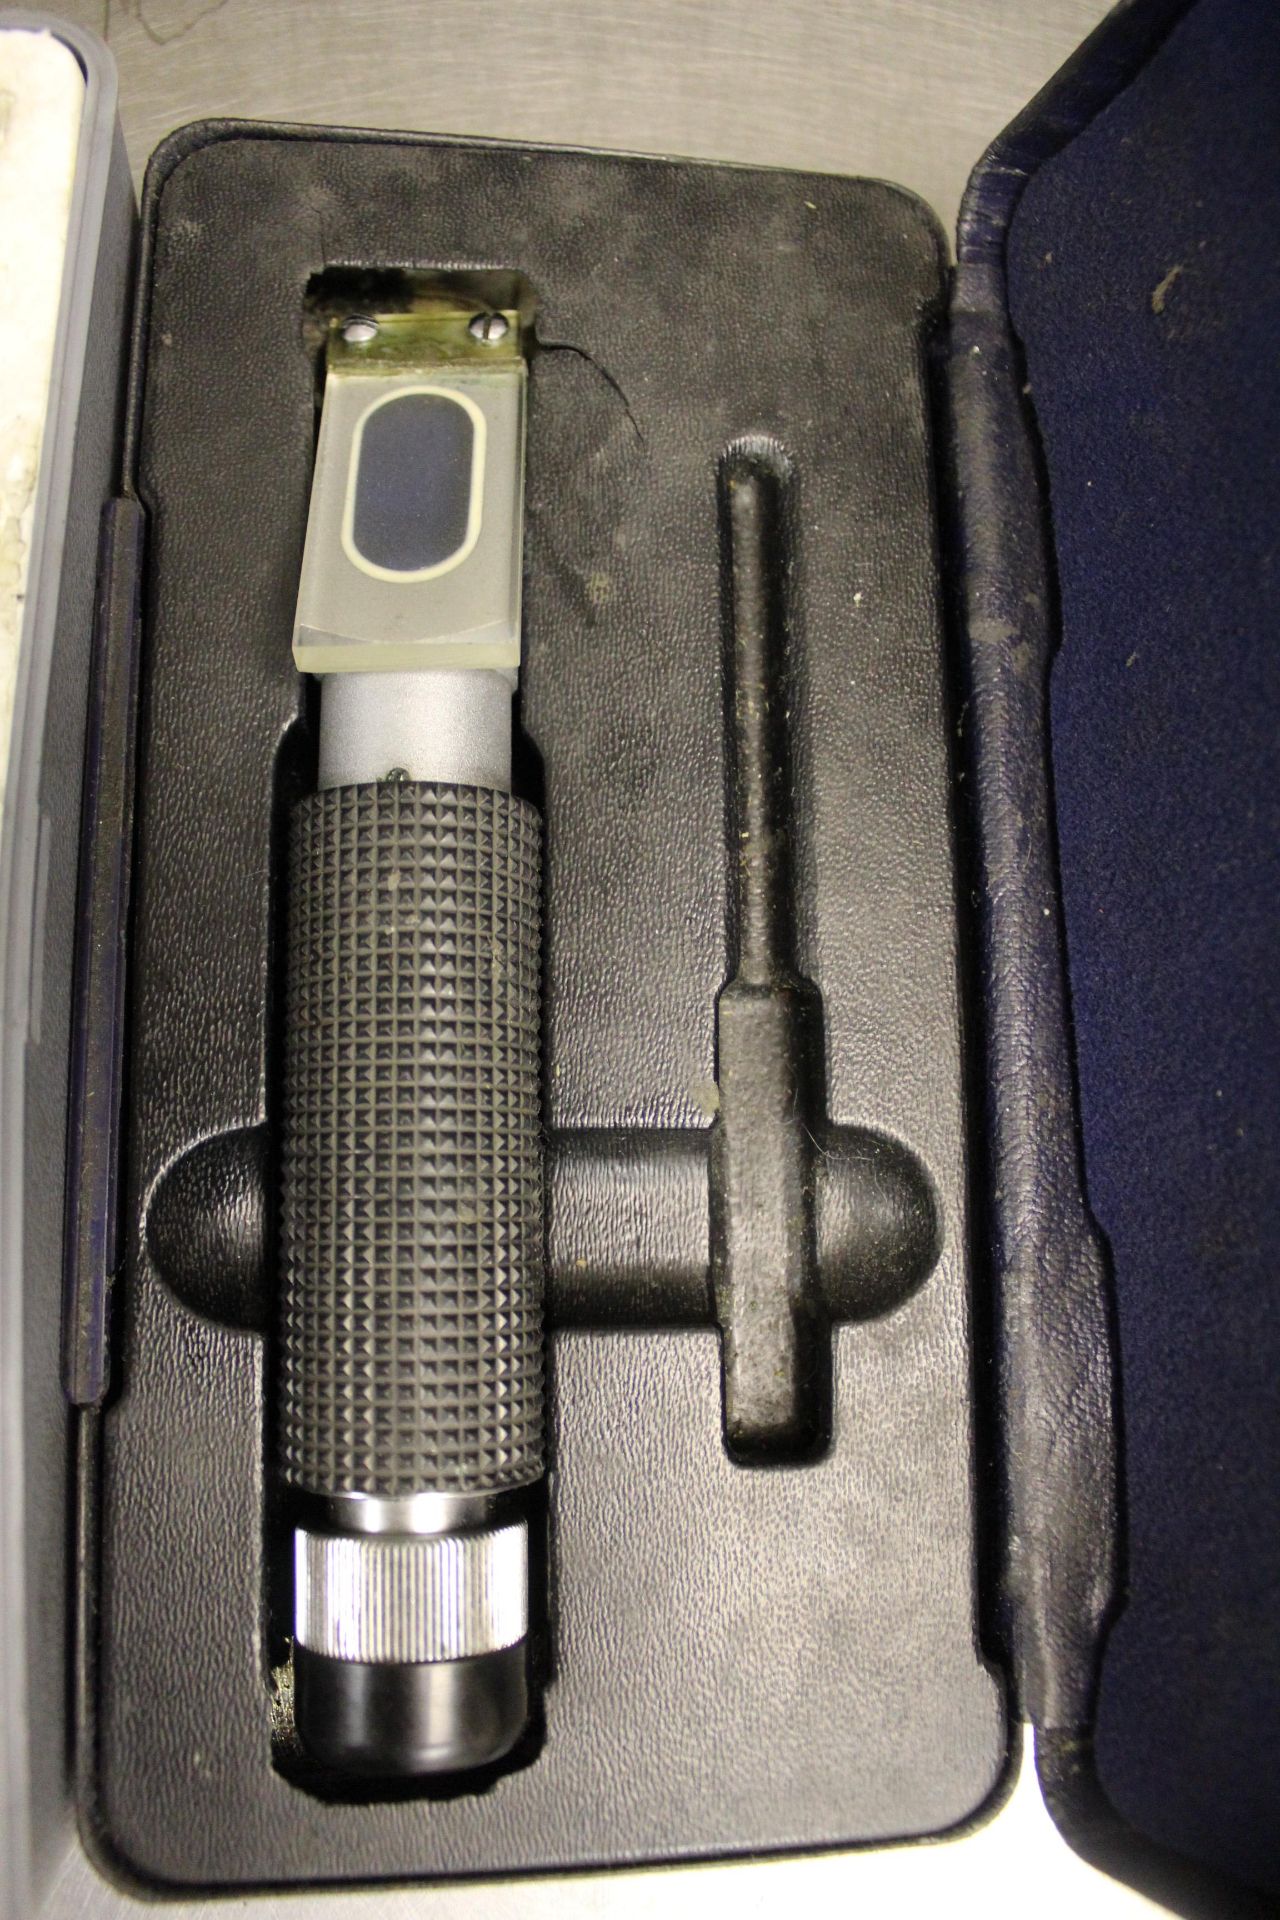 Boxed Oxford Precision portable refractometer with instructions and unbranded similar - Image 3 of 3